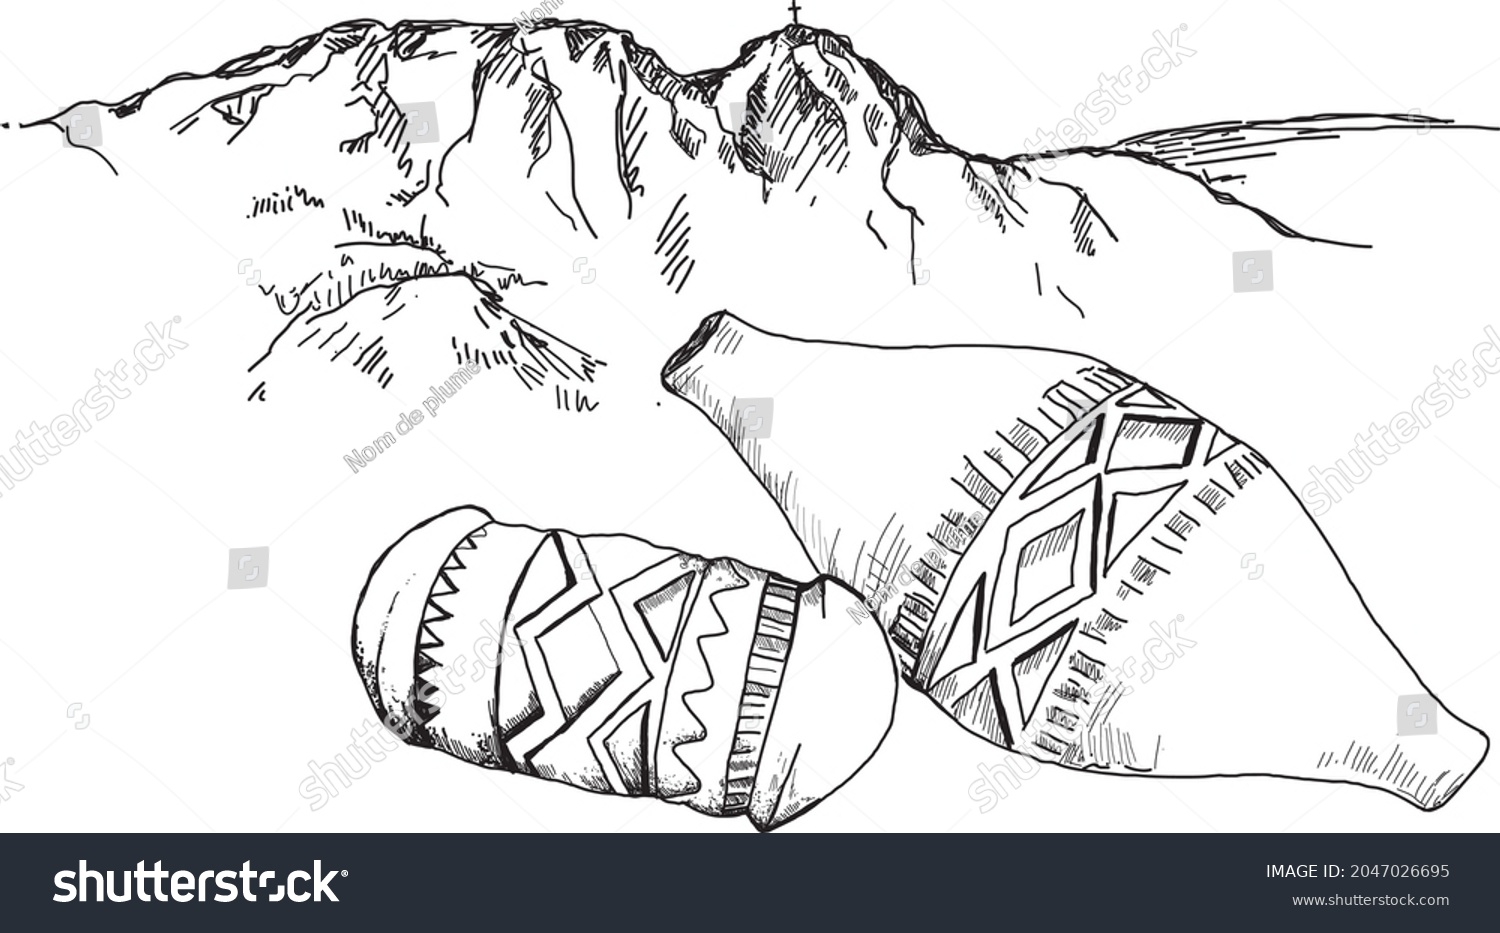 SVG of Hand-drawn graphics presenting the peak of the Giewont Tatra Mountains and a typical highlander cheese. svg